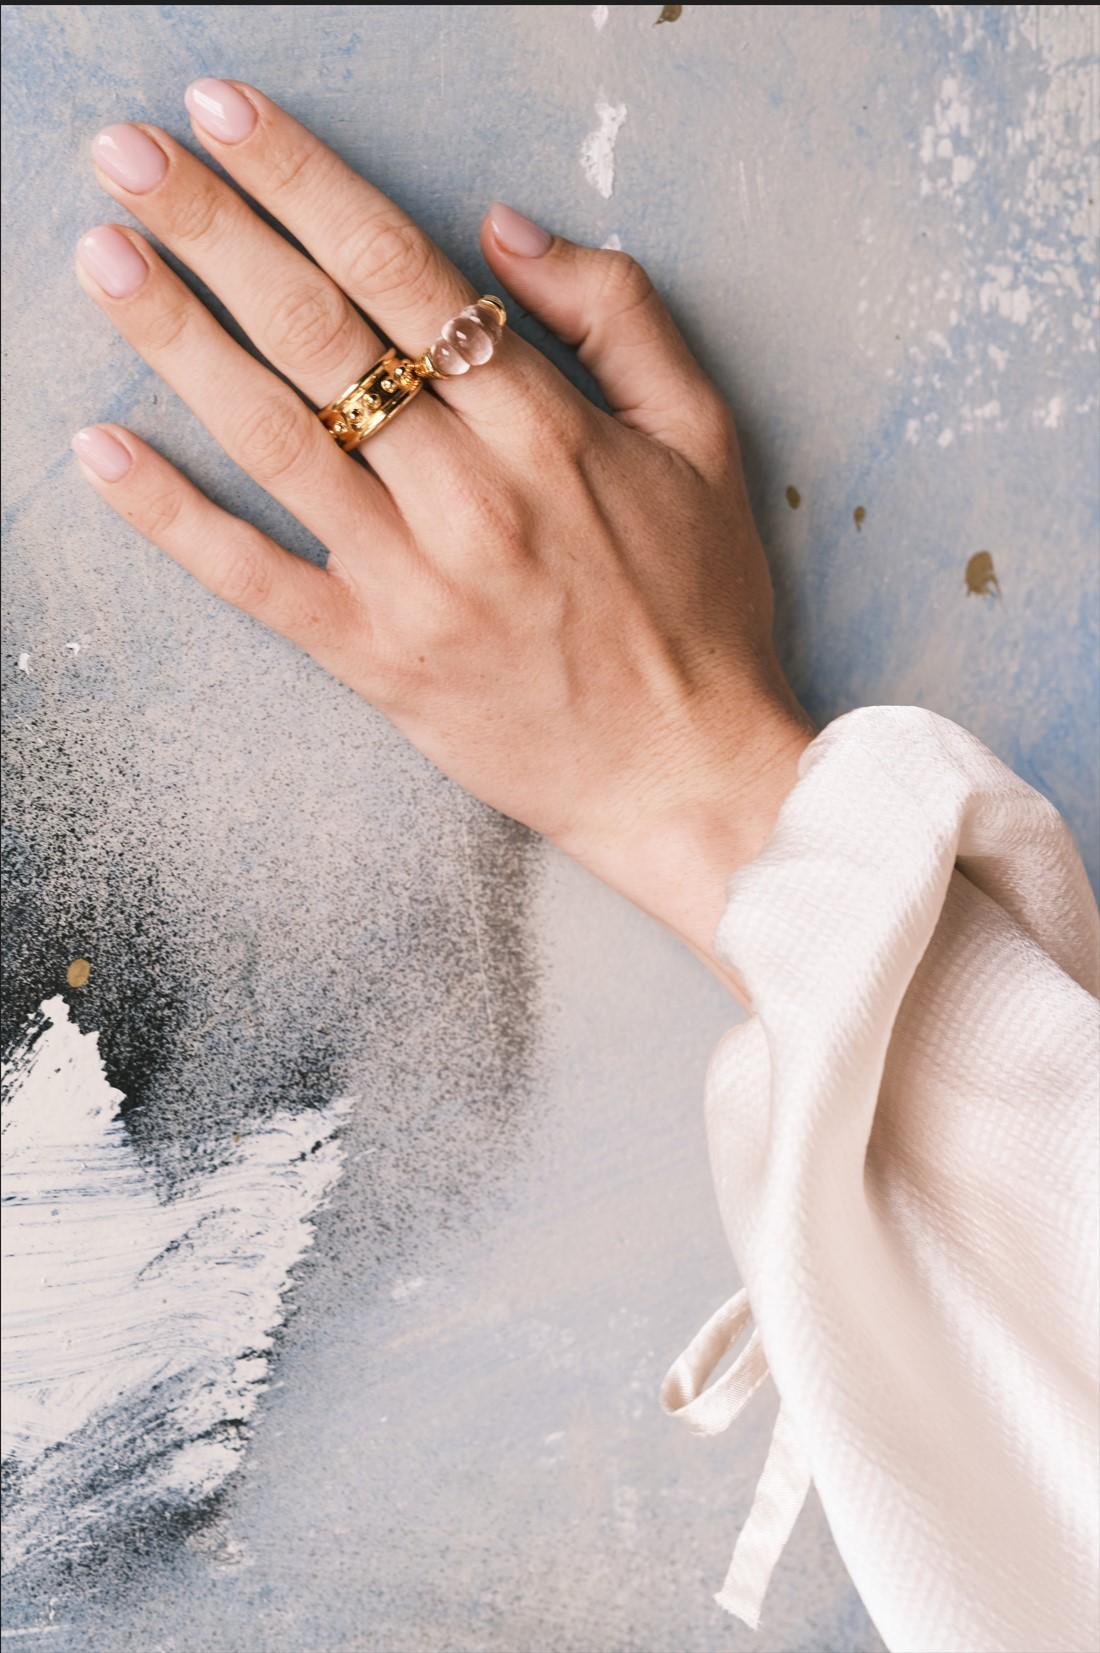 Inspired by Kahlil Gibran’s poetry, philosophy, and wisdom, designed with poetry’s rhythmic beauty and nature’s sound in mind, the SAND AND FOAM collection aspire to connect our sentiments to nature. the dance of quartz and metal.  
We work with